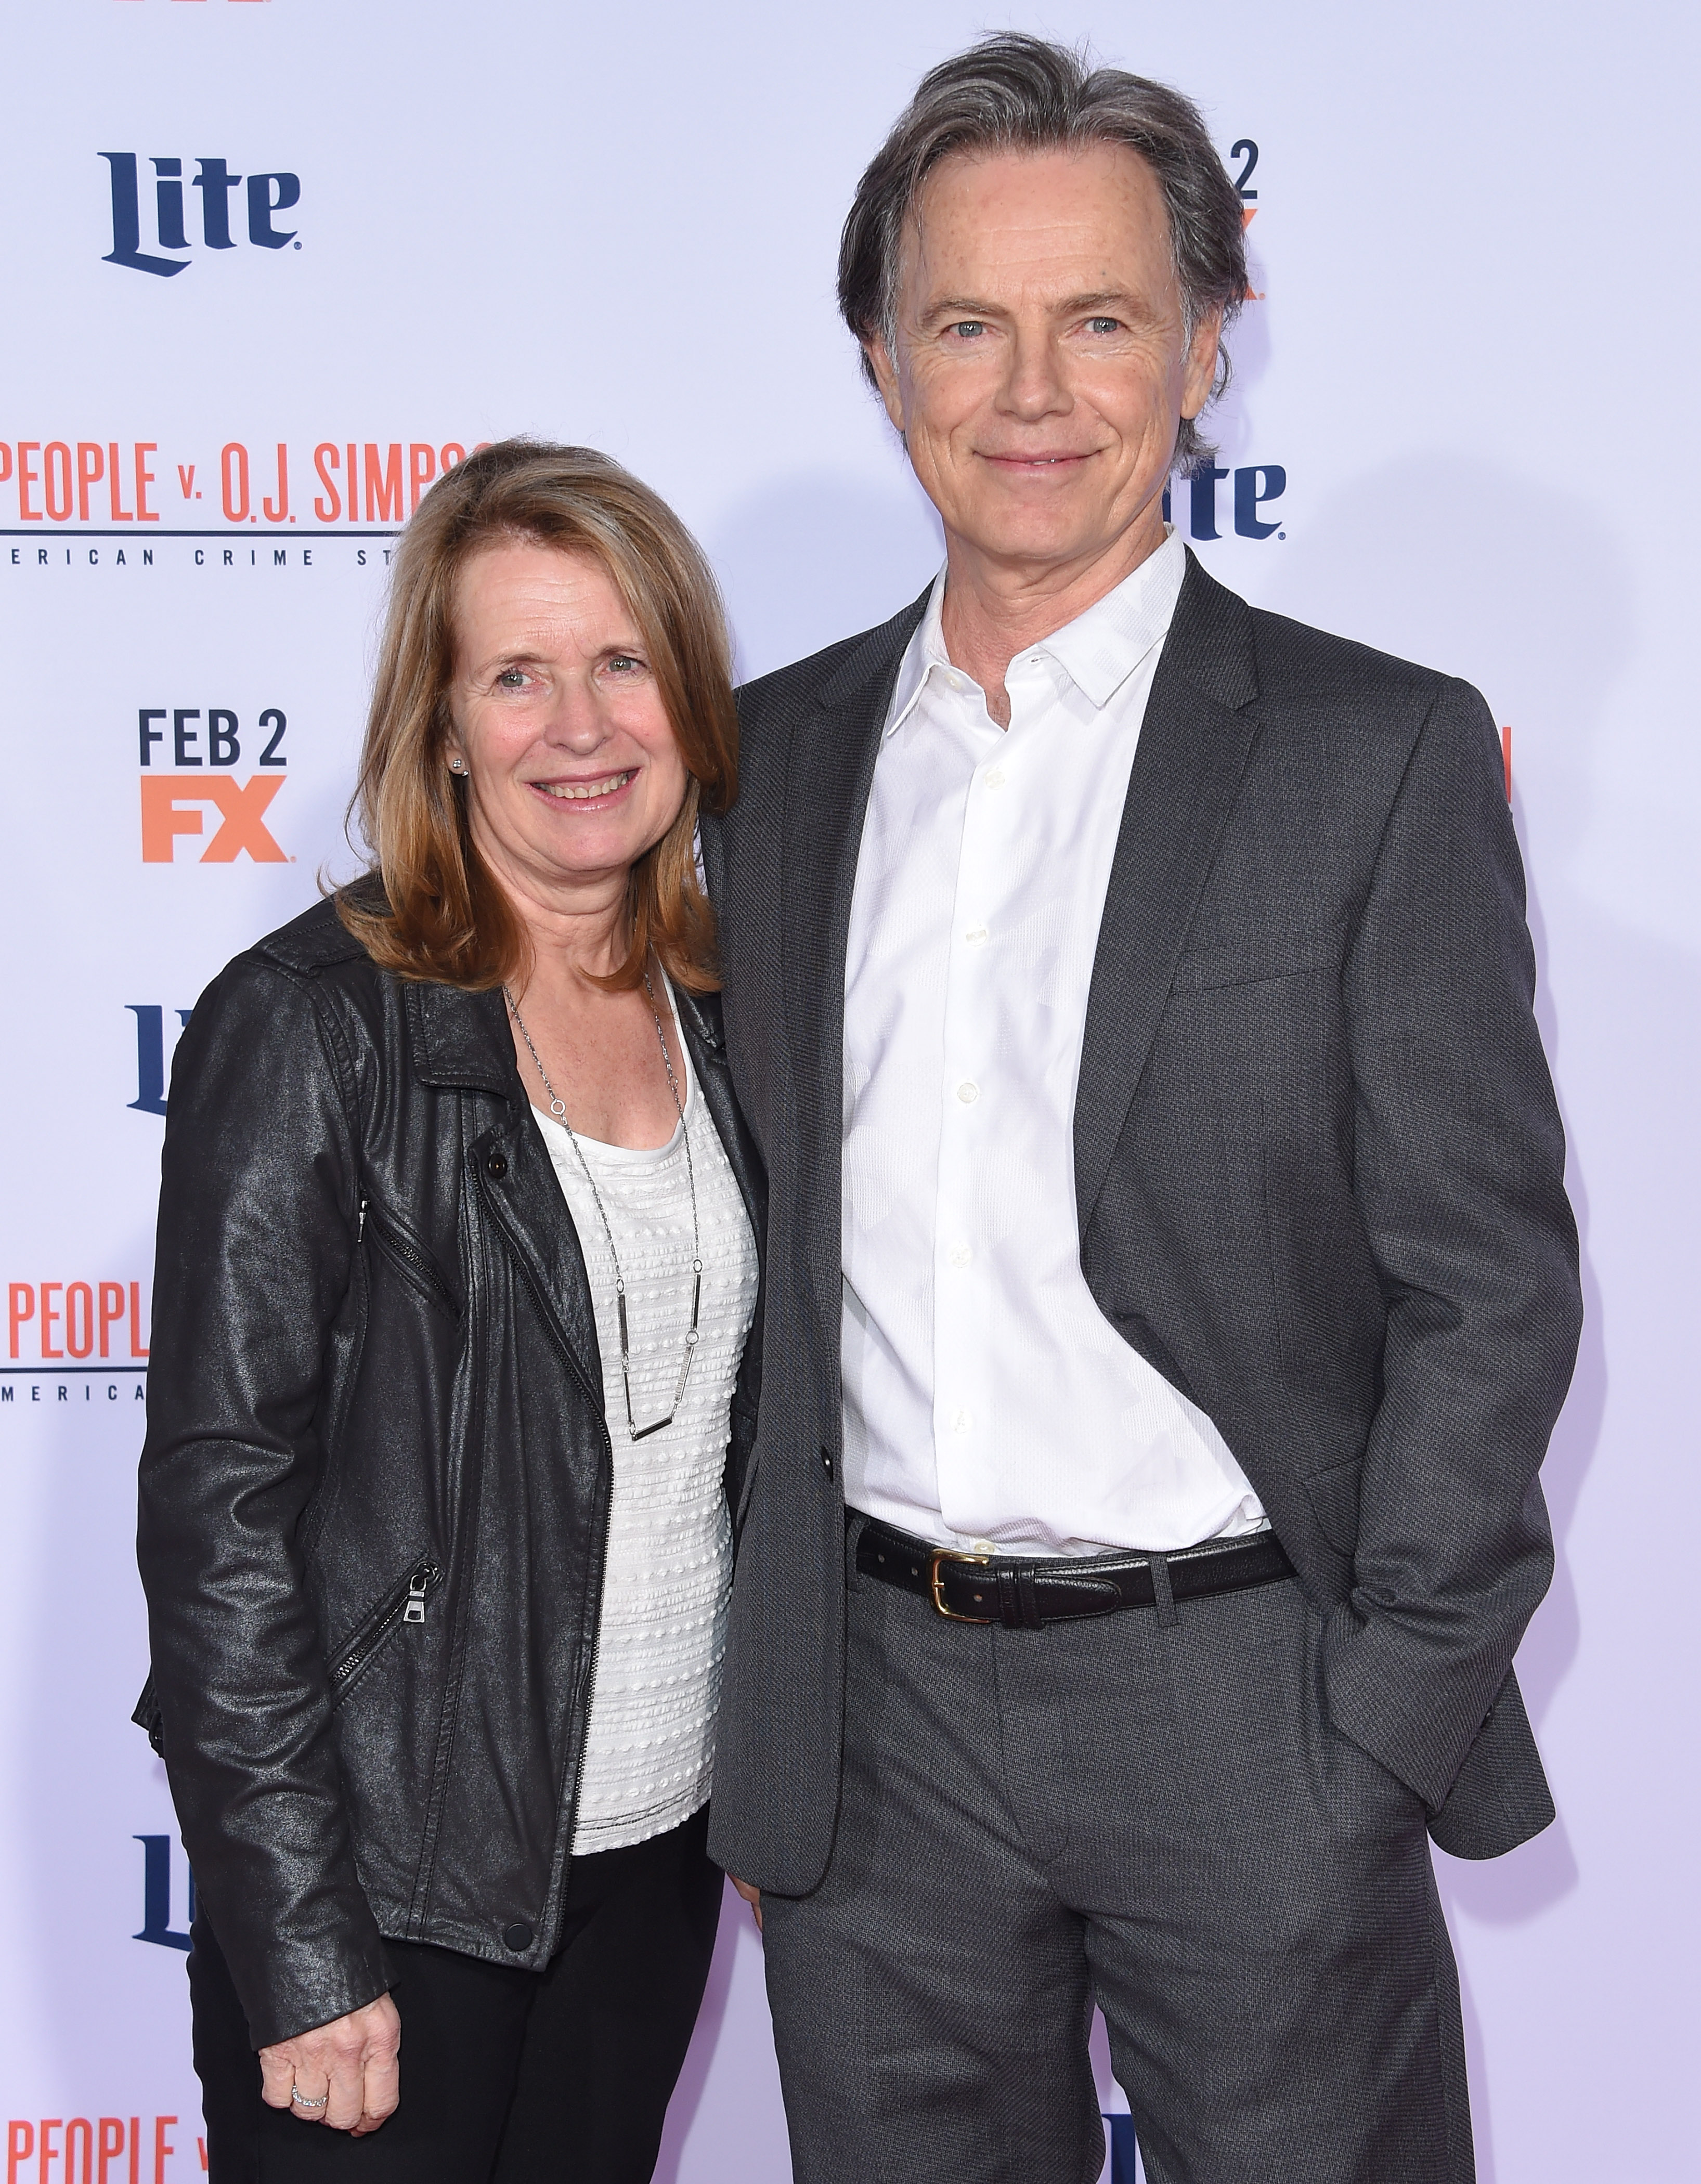 Susan Devlin and Bruce Greenwood at the premiere of "American Crime Story - The People V. O.J. Simpson" on January 27, 2016, in Westwood, California. | Source: Getty Images